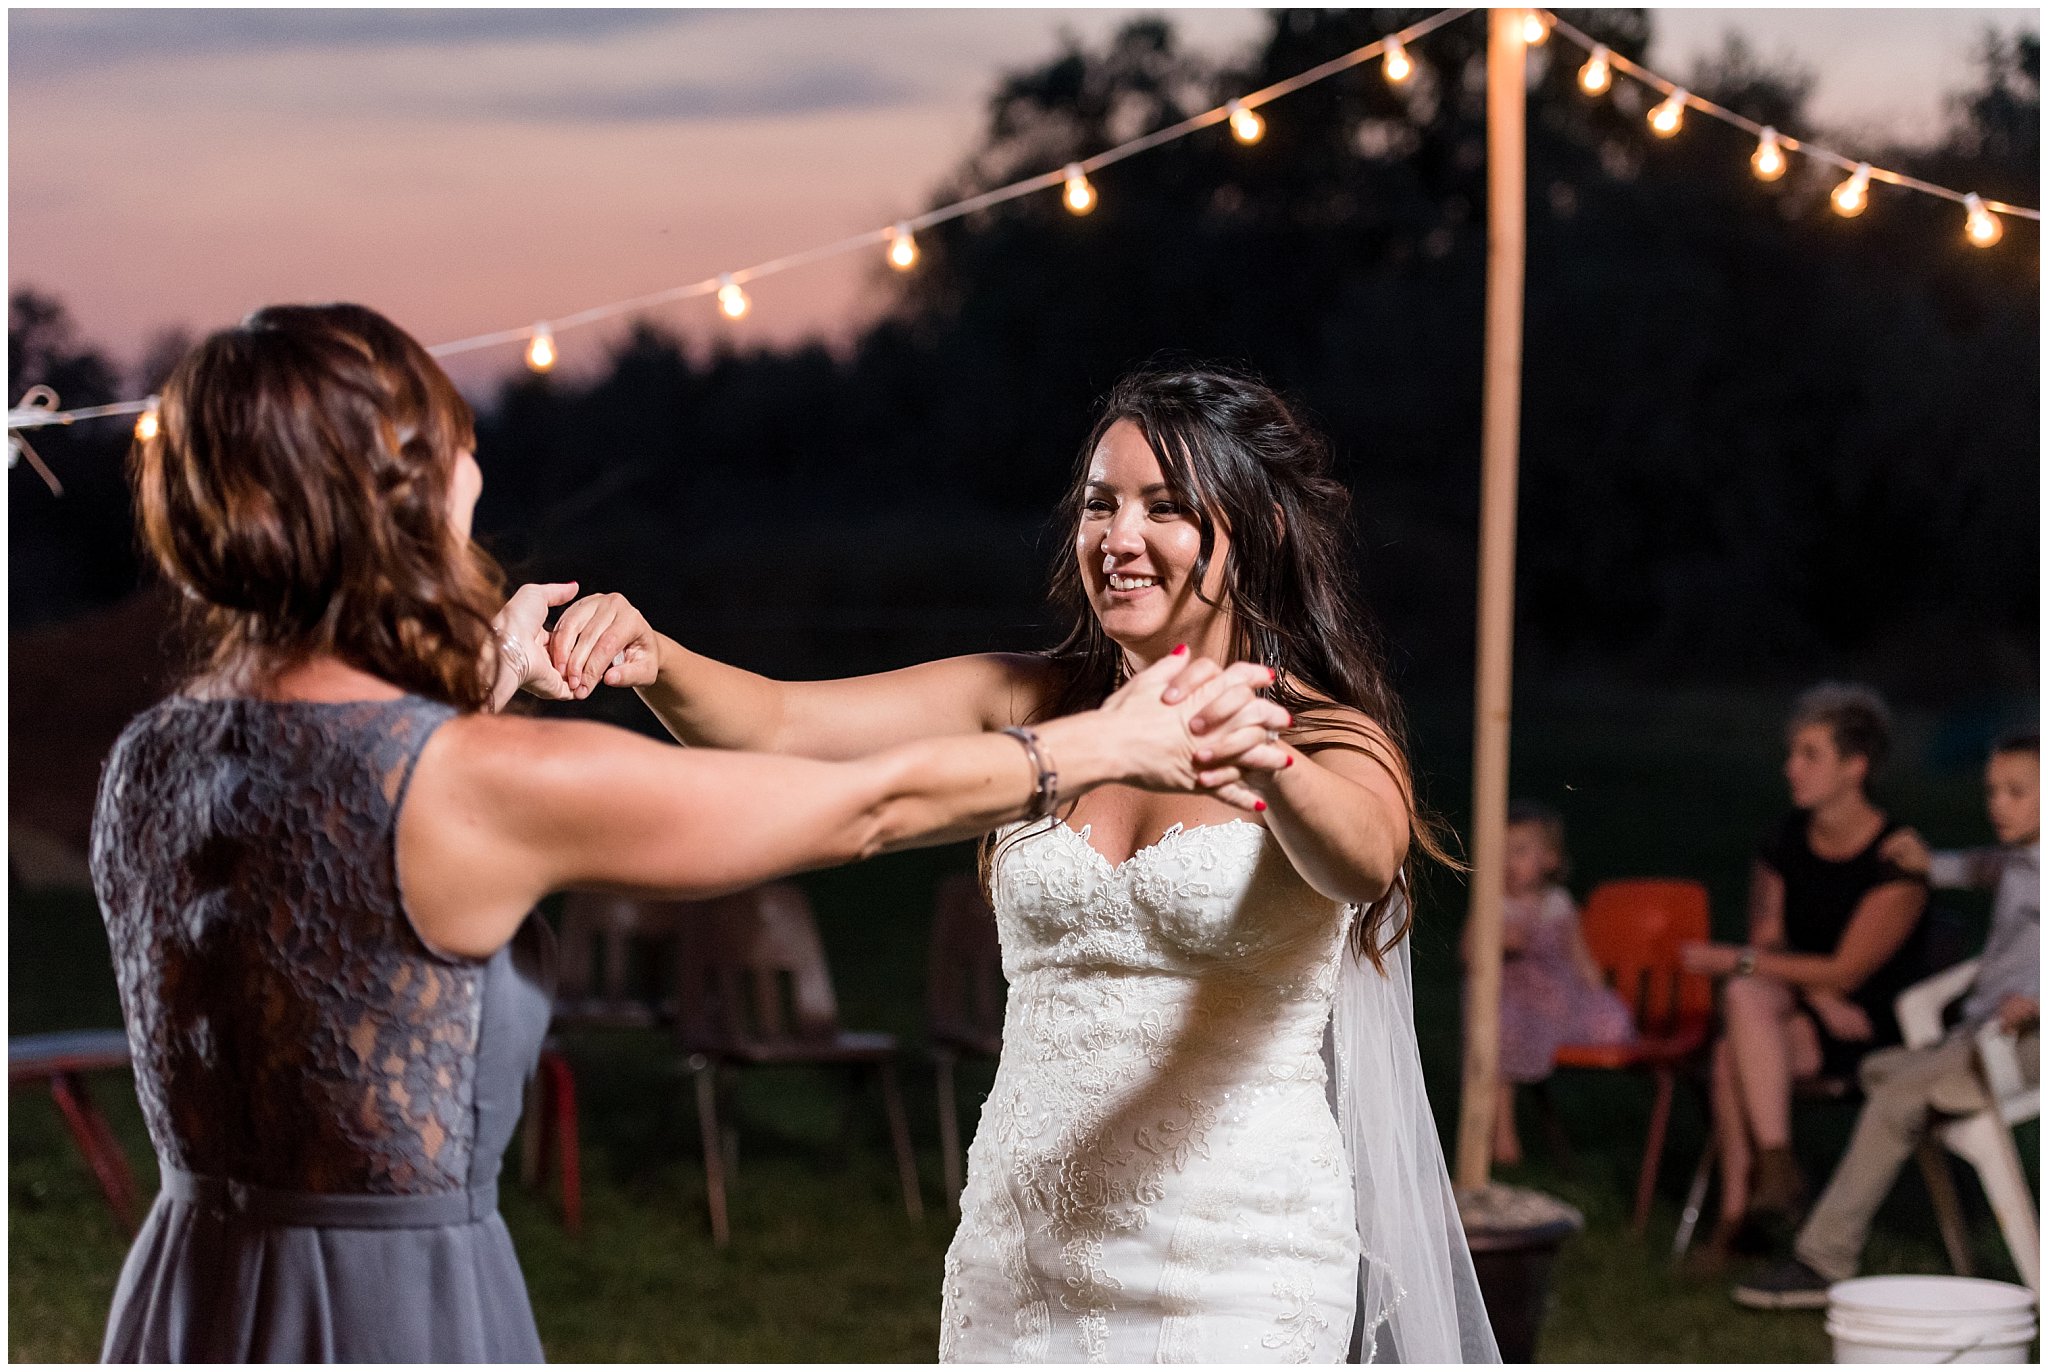 Bride and bridesmaid party dancing | Red and Grey wedding | Davis County Outdoor Wedding | Jessie and Dallin Photography